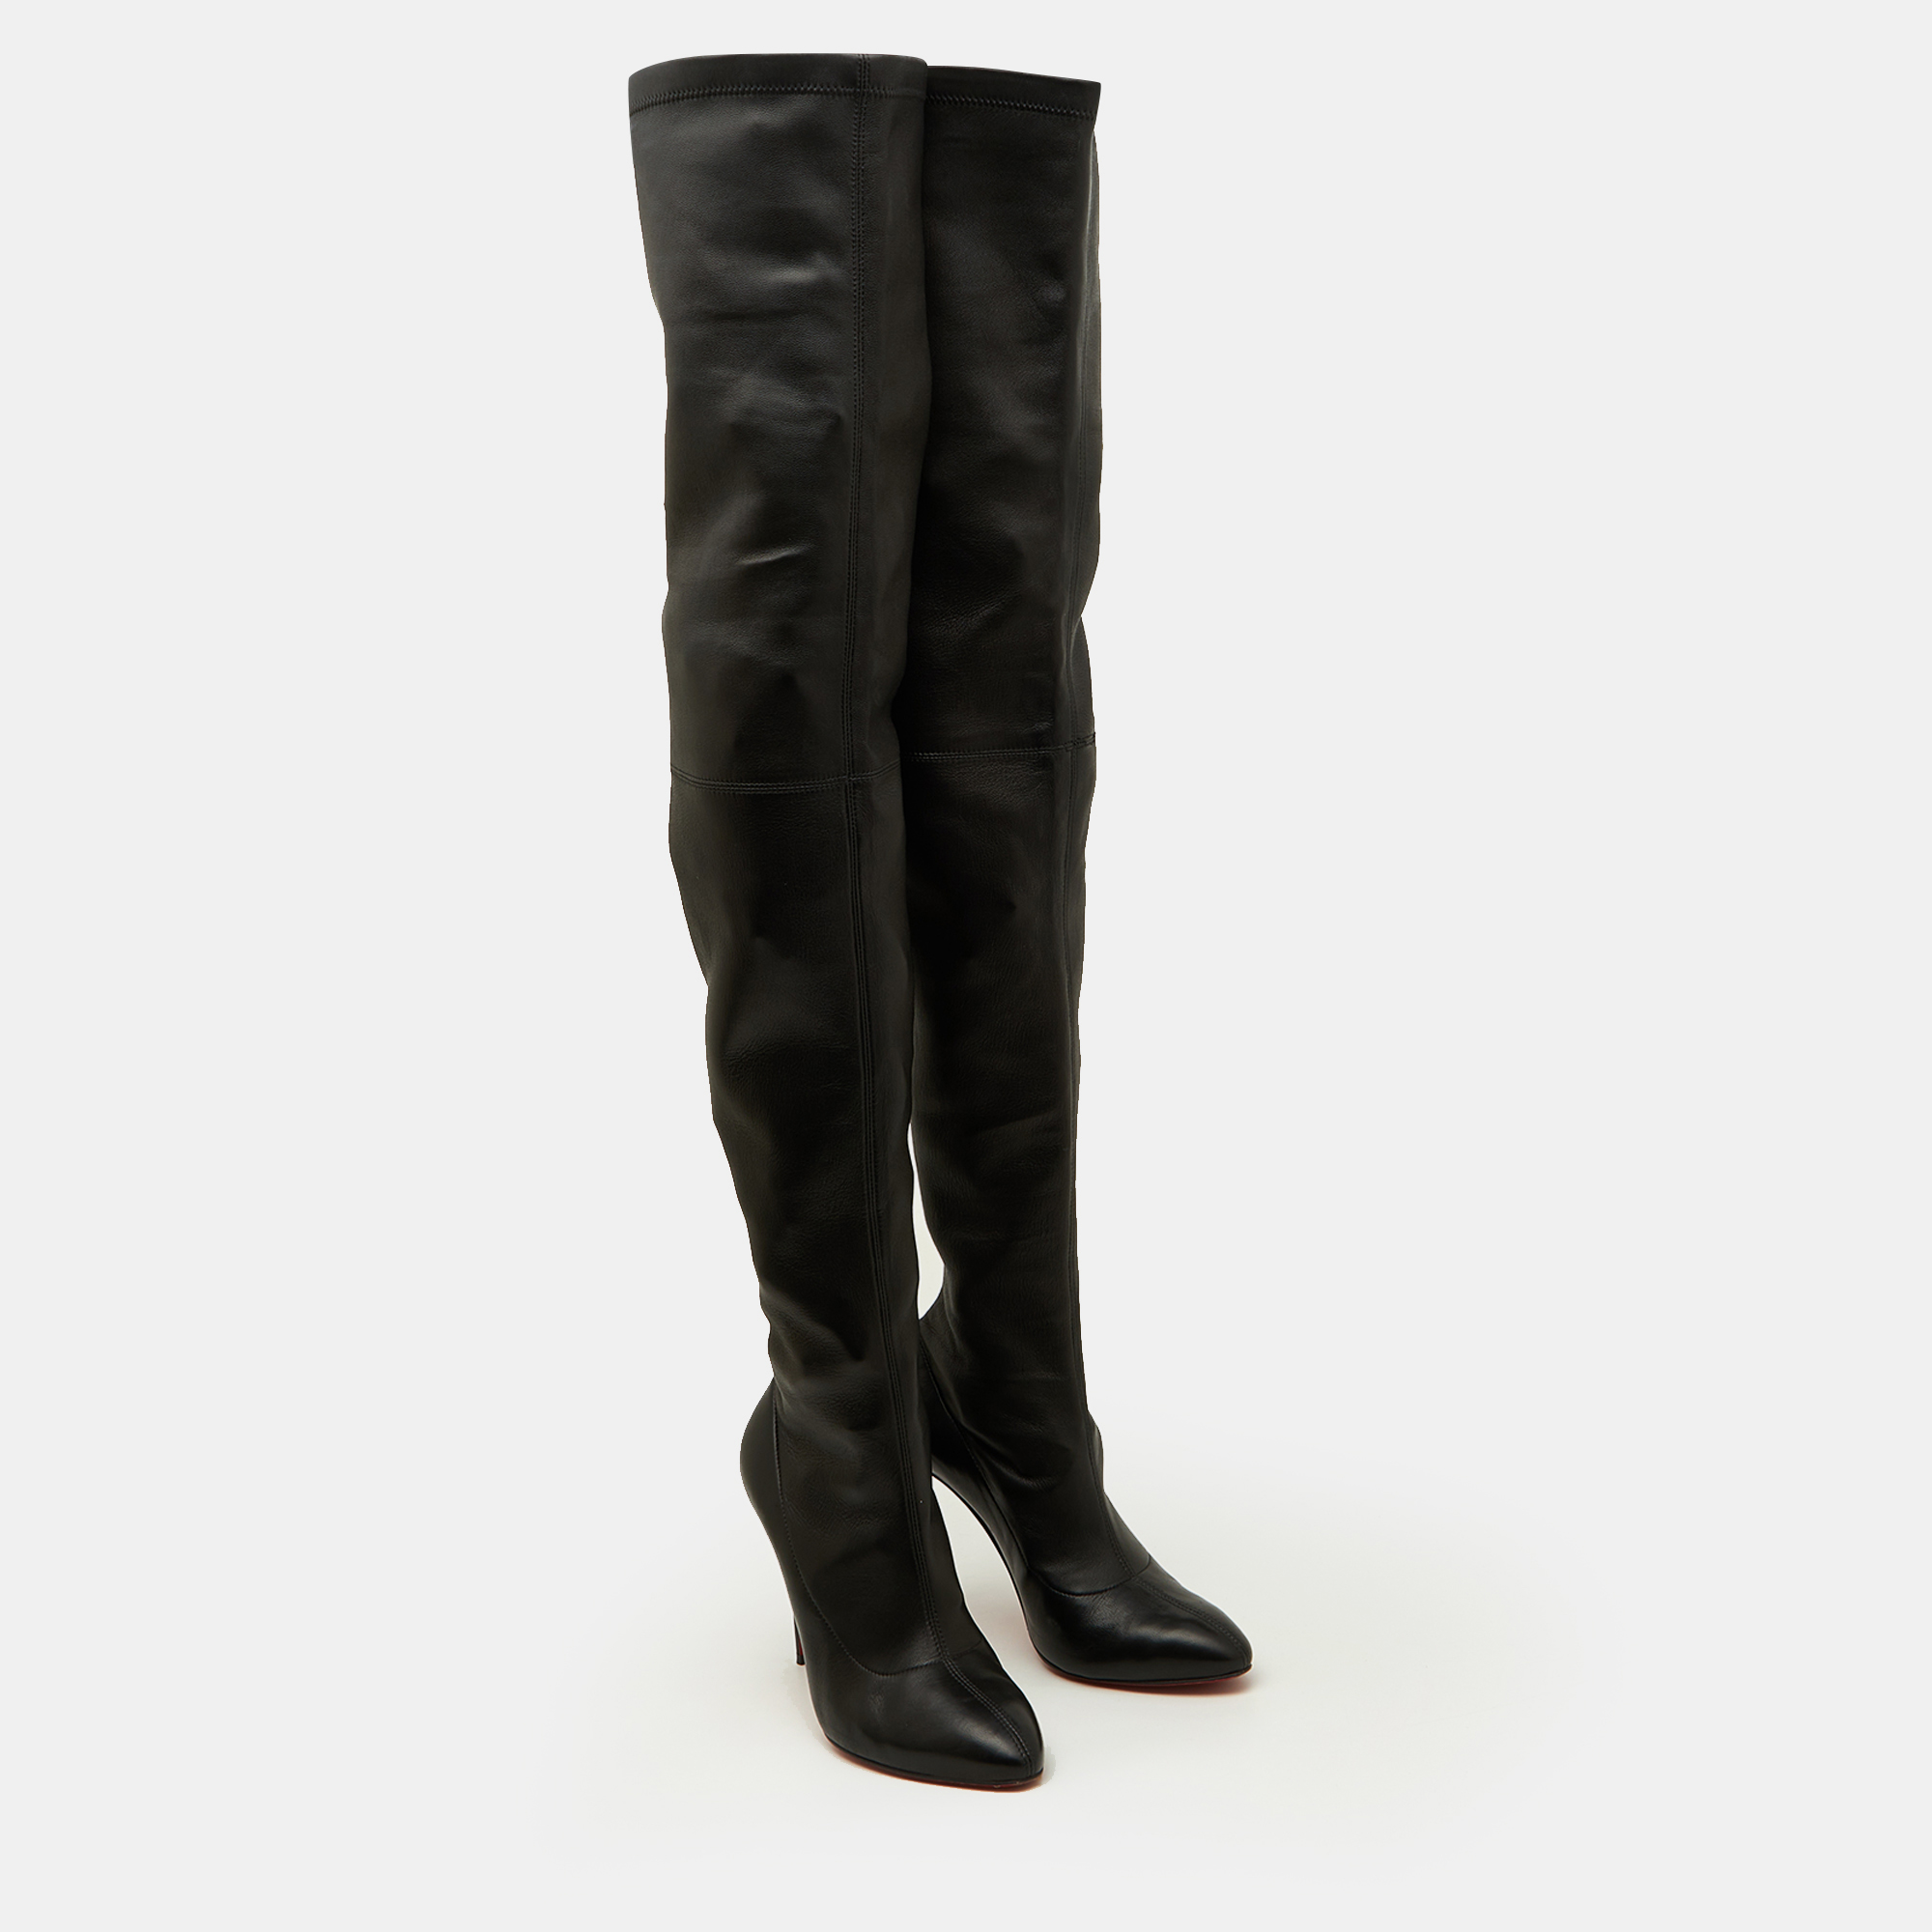 Christian Louboutin Black Leather Thigh High Boots Size 38